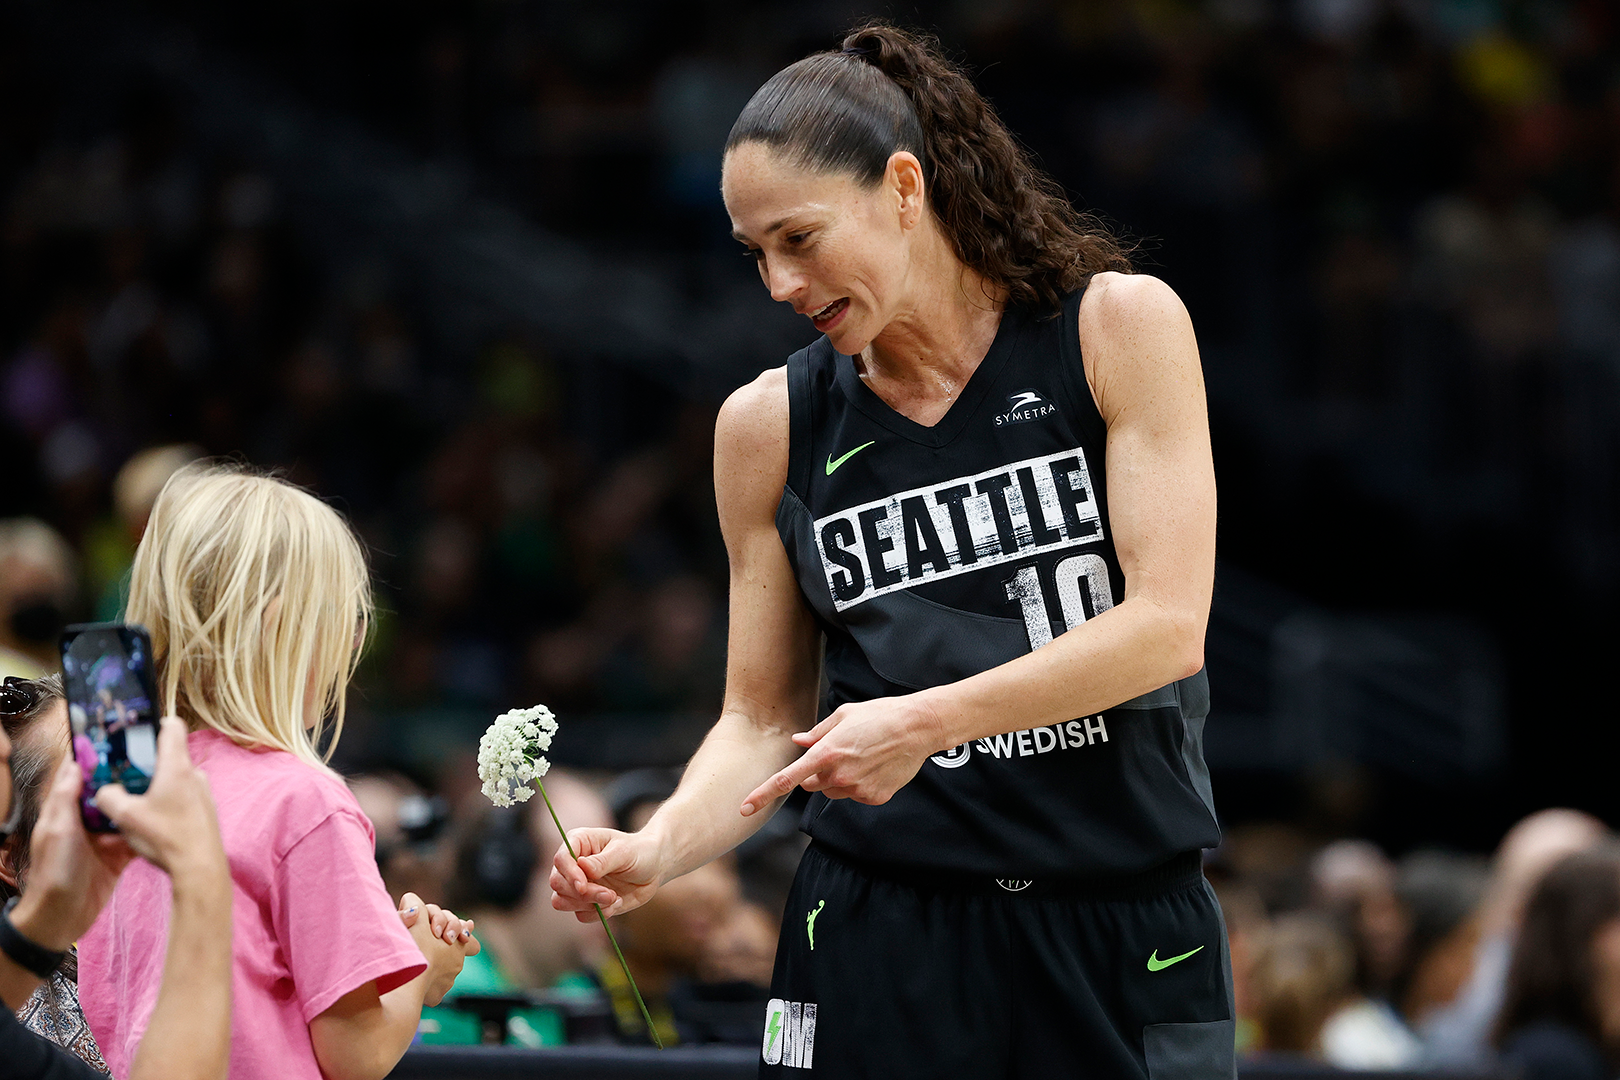 SEATTLE, WASHINGTON - AUGUST 07: A fan gives Sue Bird #10 of the Seattle Storm a flower during the first quarter of her last regular season home game of her career against the Las Vegas Aces at Climate Pledge Arena on August 07, 2022 in Seattle, Washington.